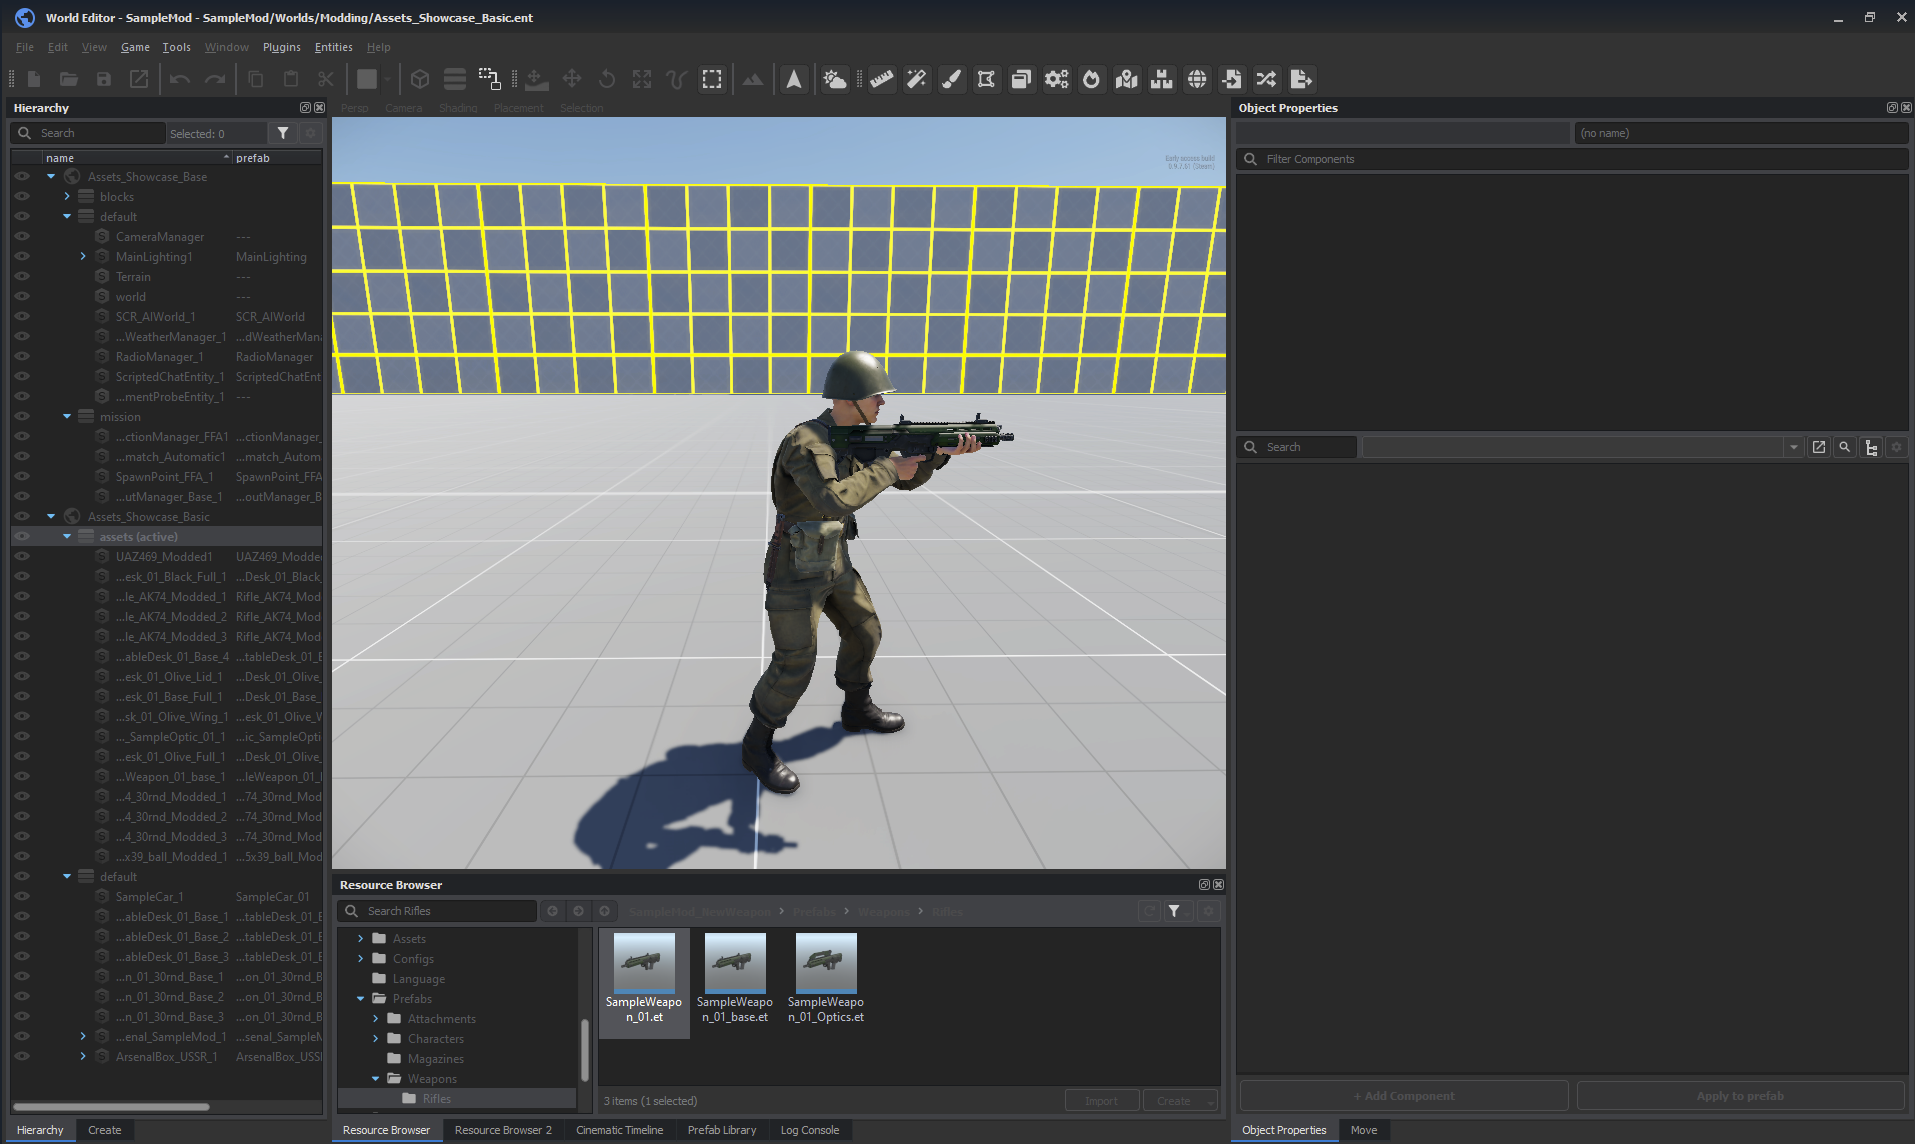 armareforger-new-weapon-animation-testing-ik-pose.png